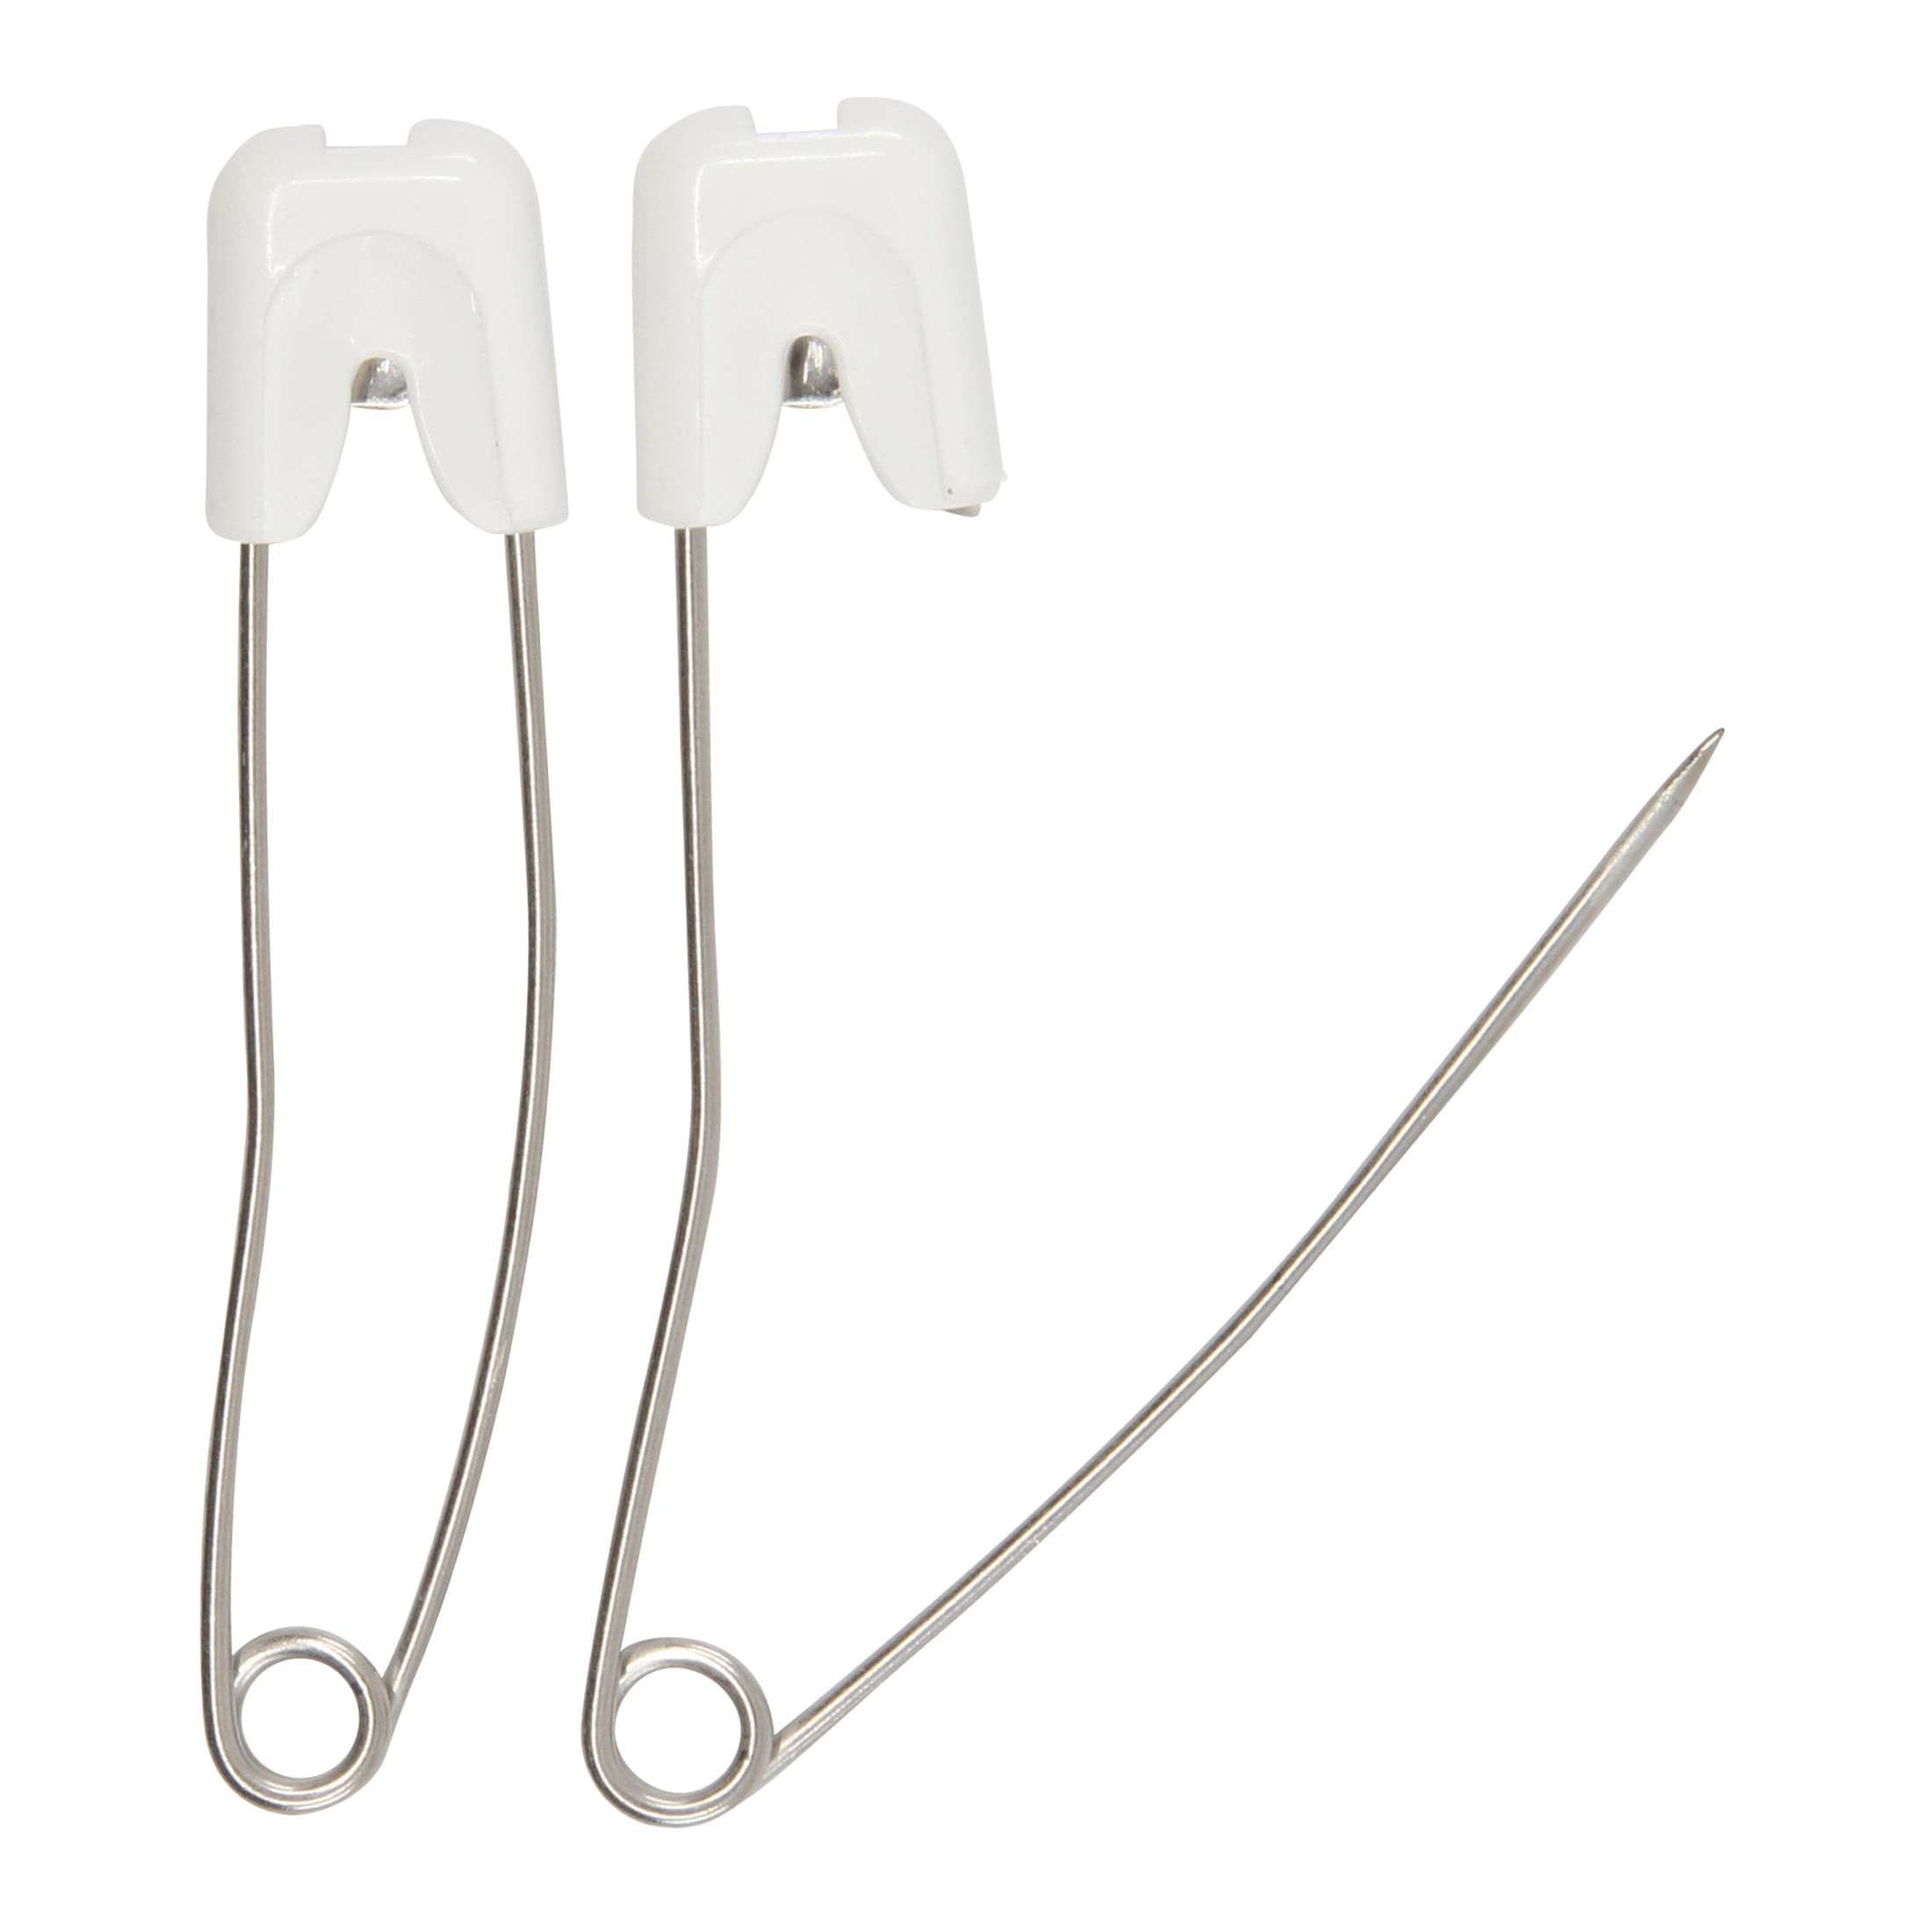 Dritz Diaper Pins - Are All Pins Created Equal?